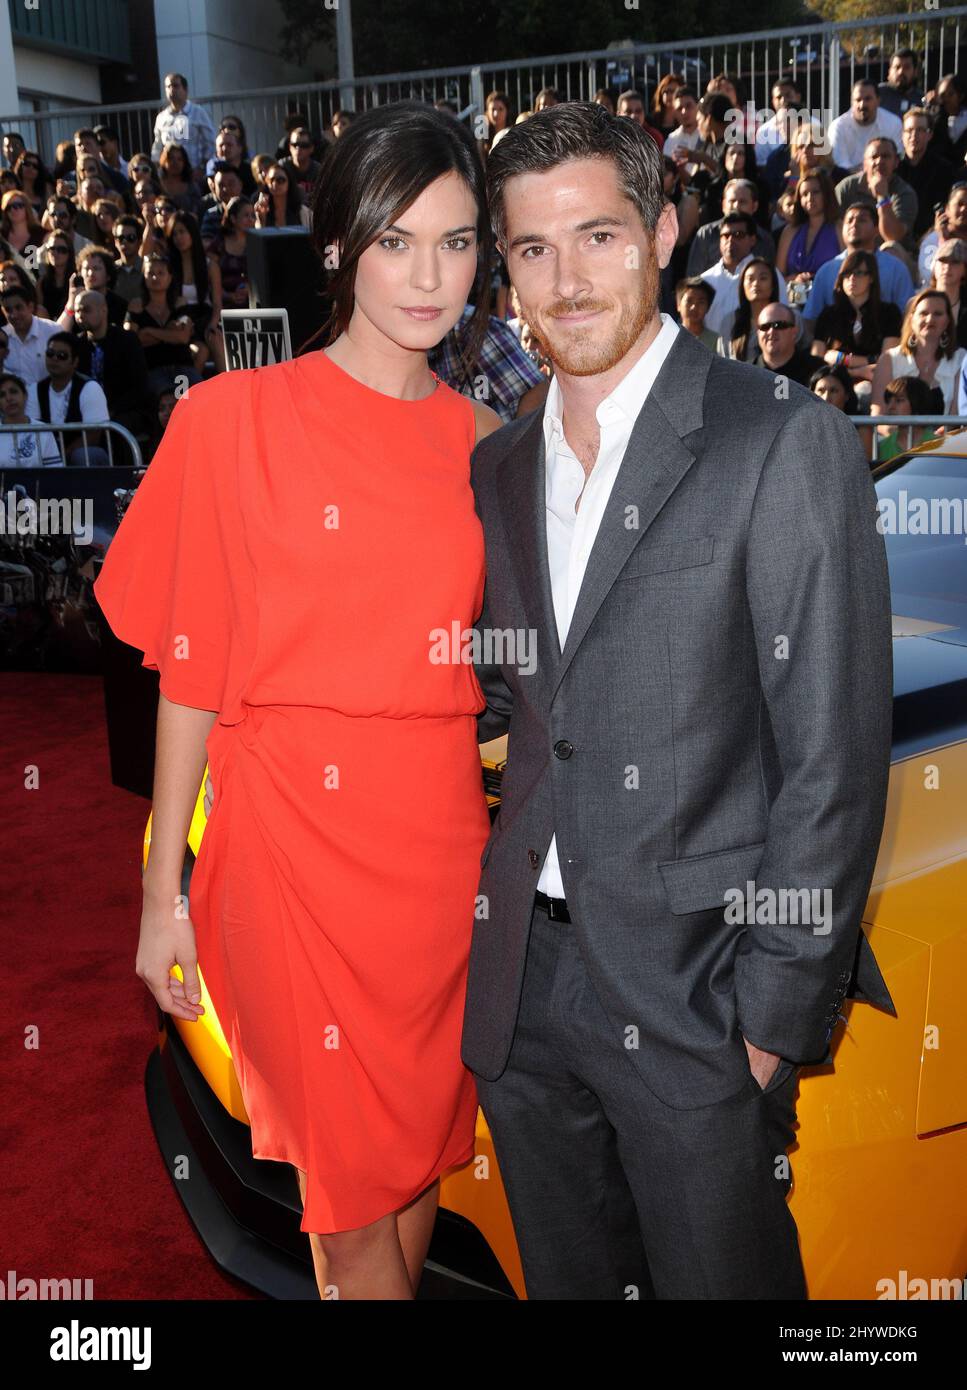 Odette Yustman and Dave Annable at the Premiere of "Transformers: Revenge of the Fallen" at the Mann Village Theatre in Los Angeles. Stock Photo